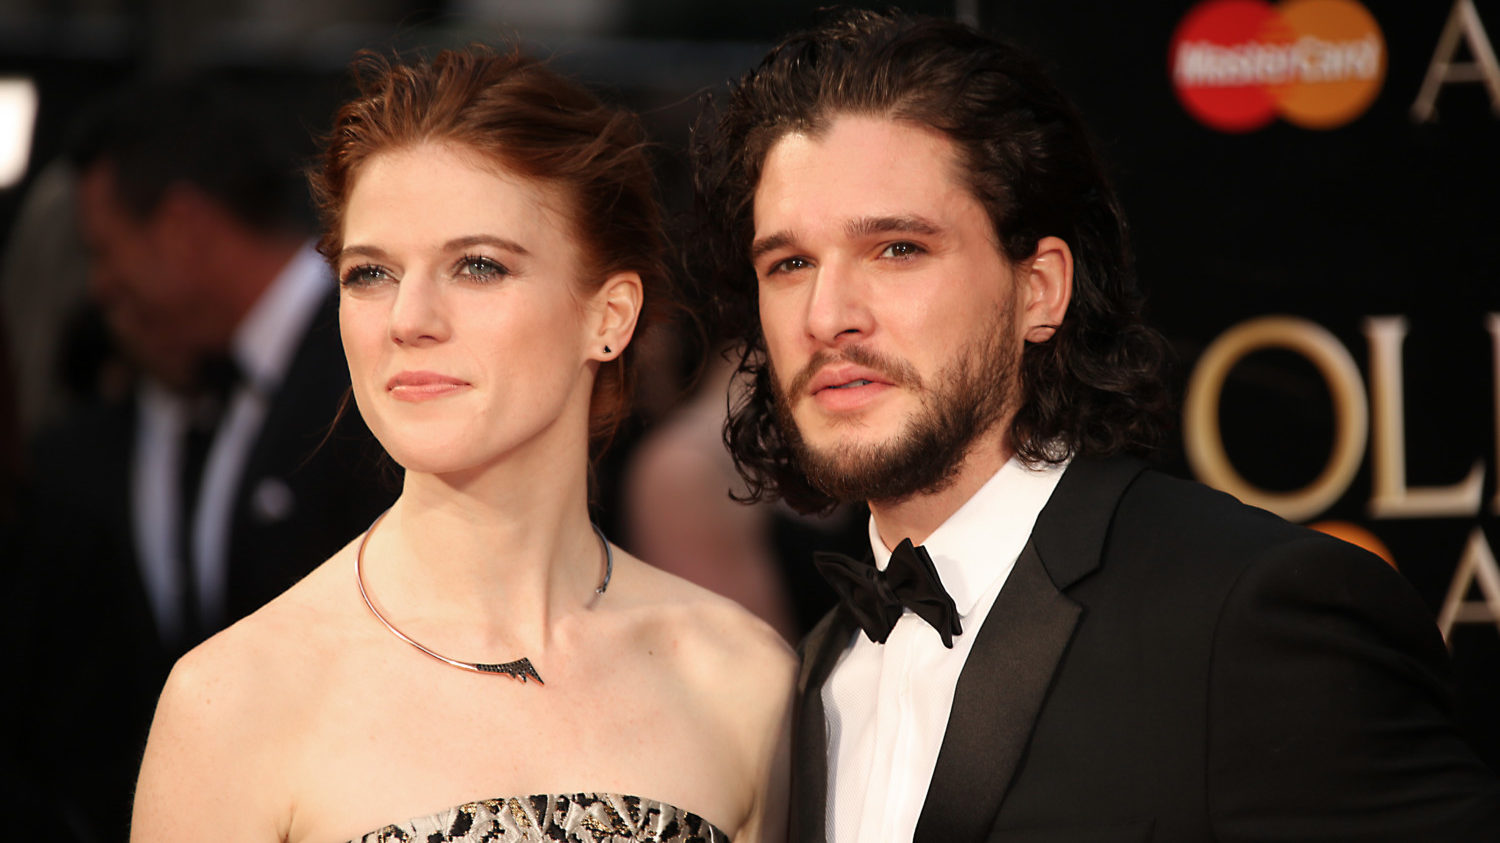 ‘Game Of Thrones’ Stars Rose Leslie And Kit Harington Are Expecting Their First Child